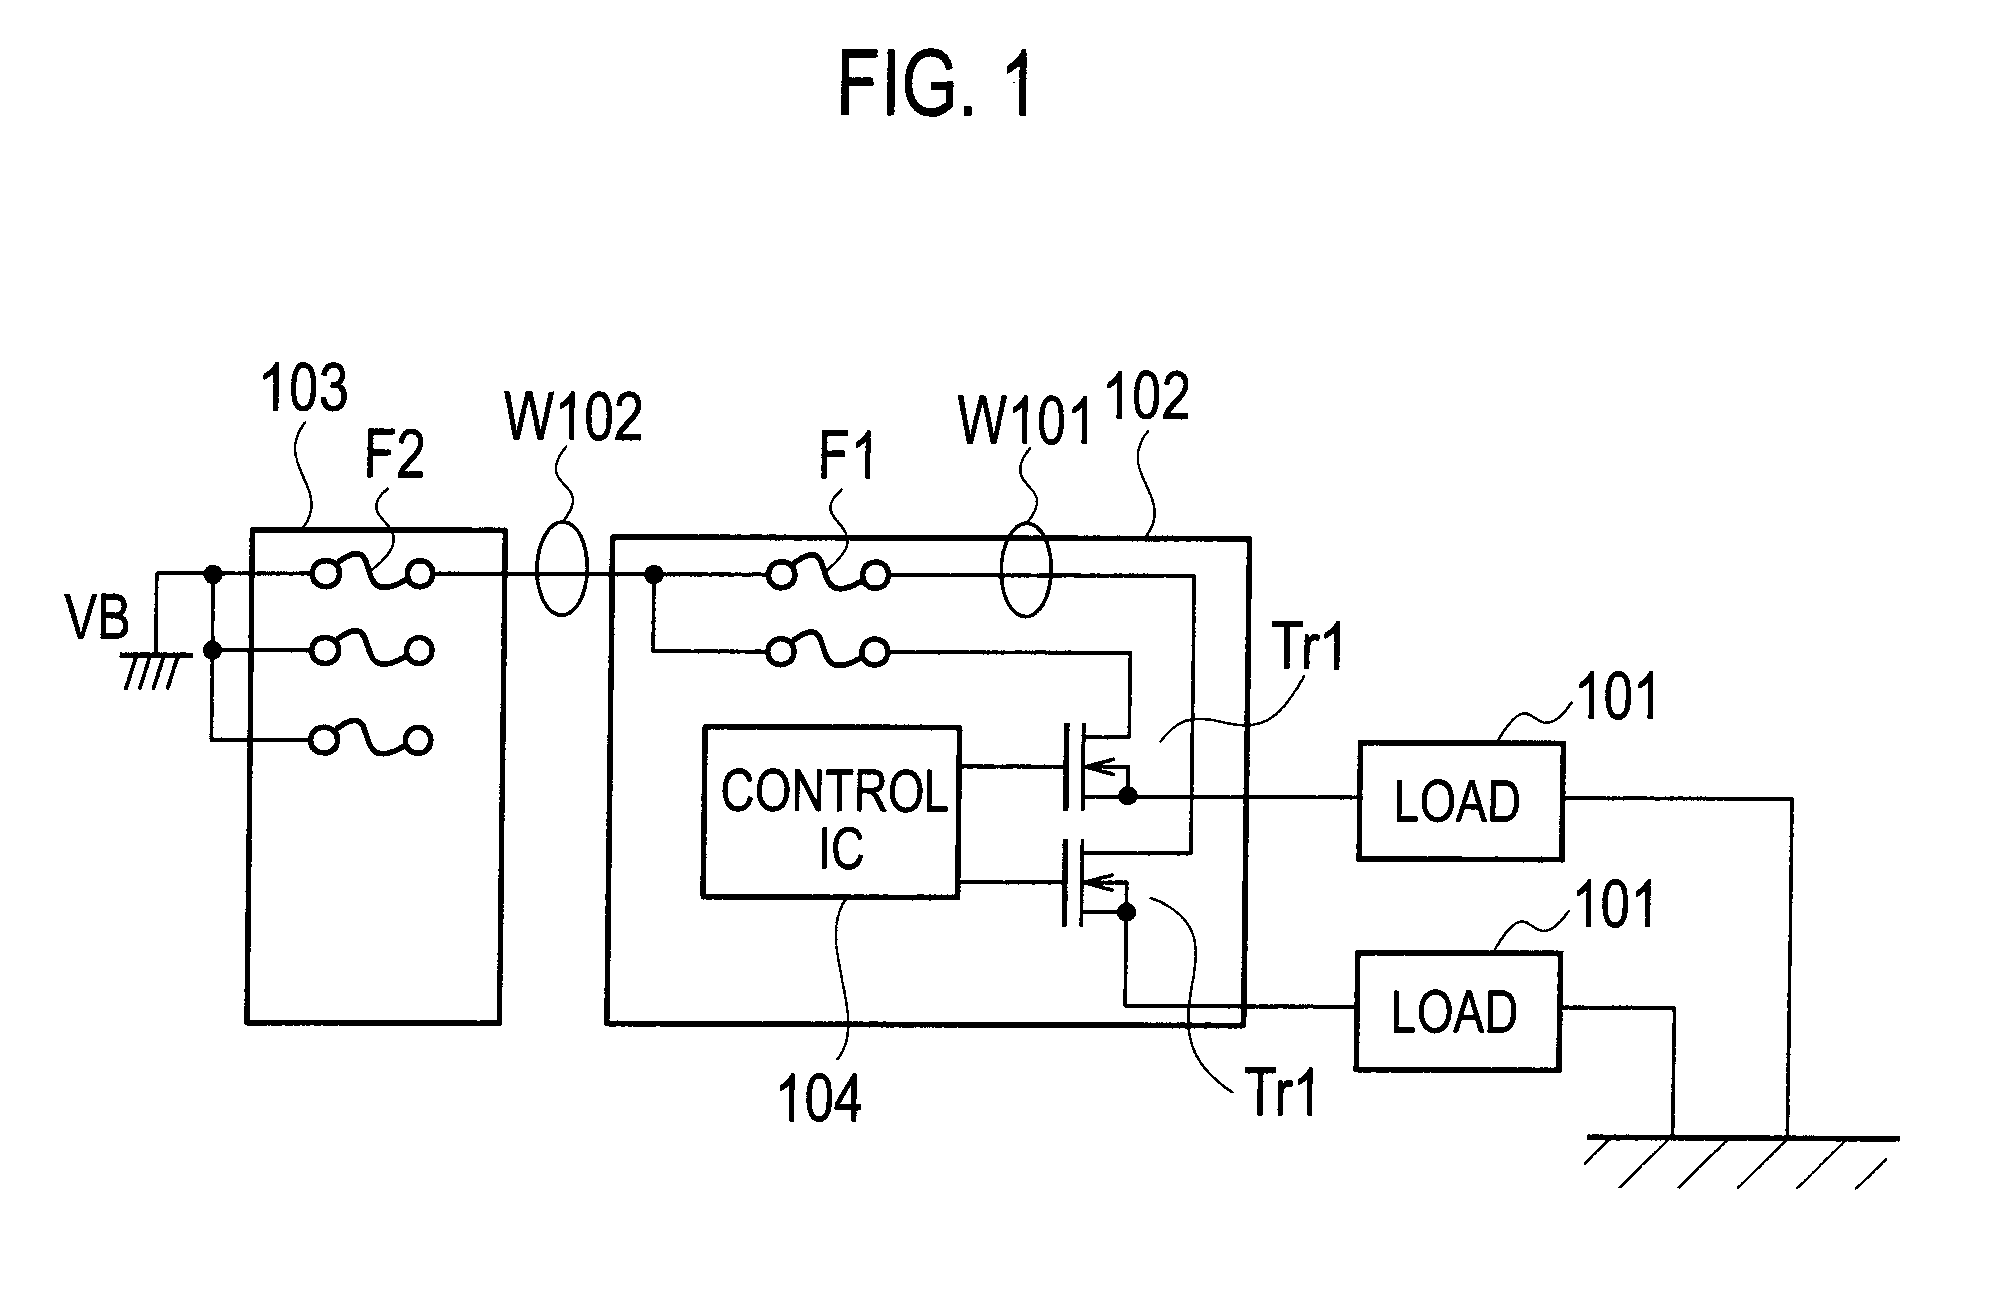 Protection apparatus of load circuit